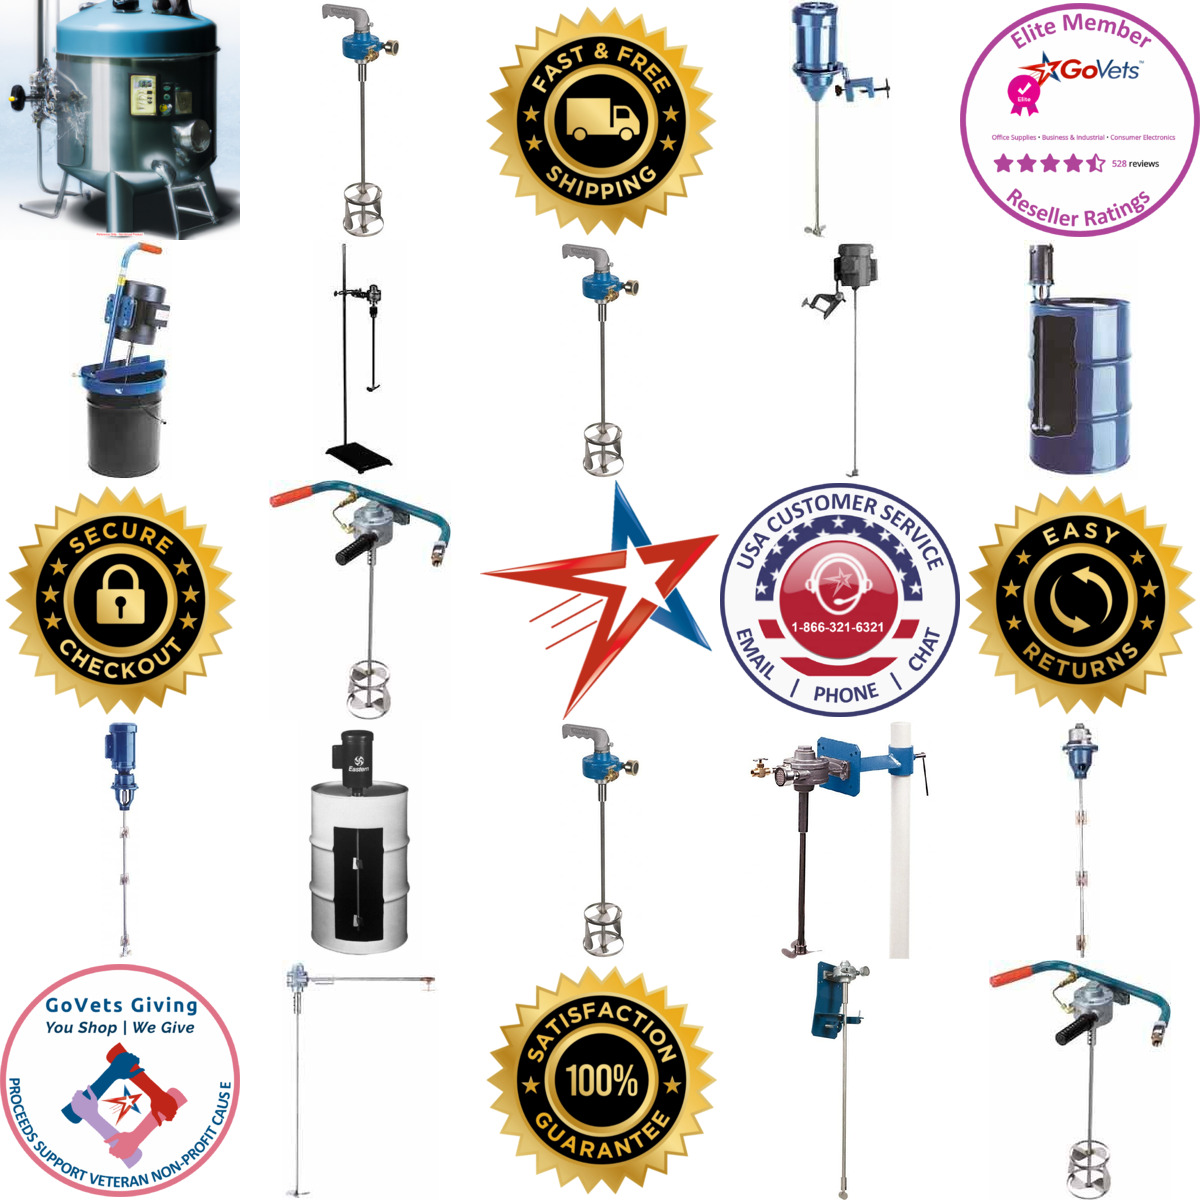 A selection of Air Powered Mixers products on GoVets